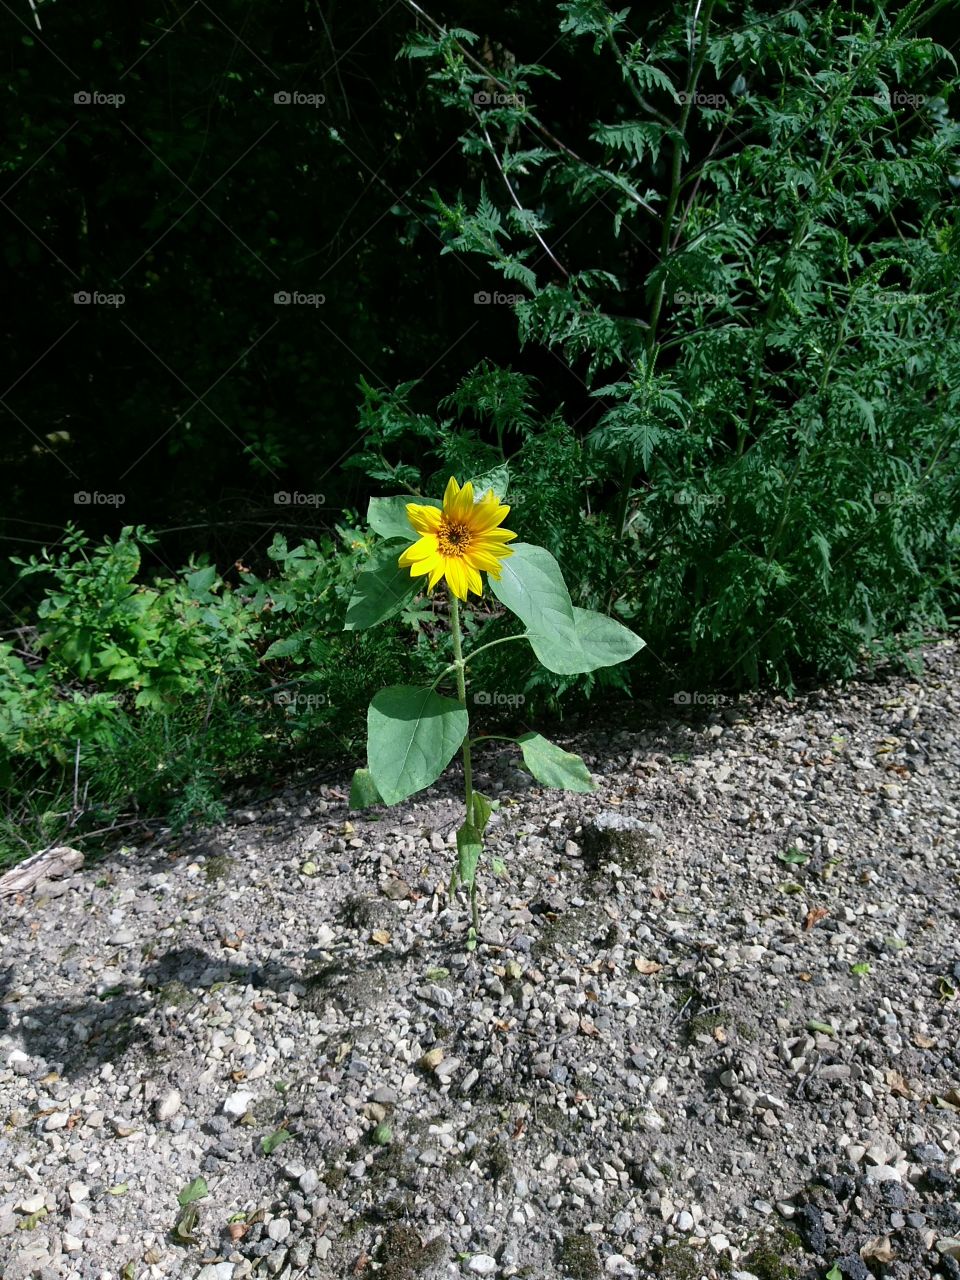 It's the only sunflower on the bike trail